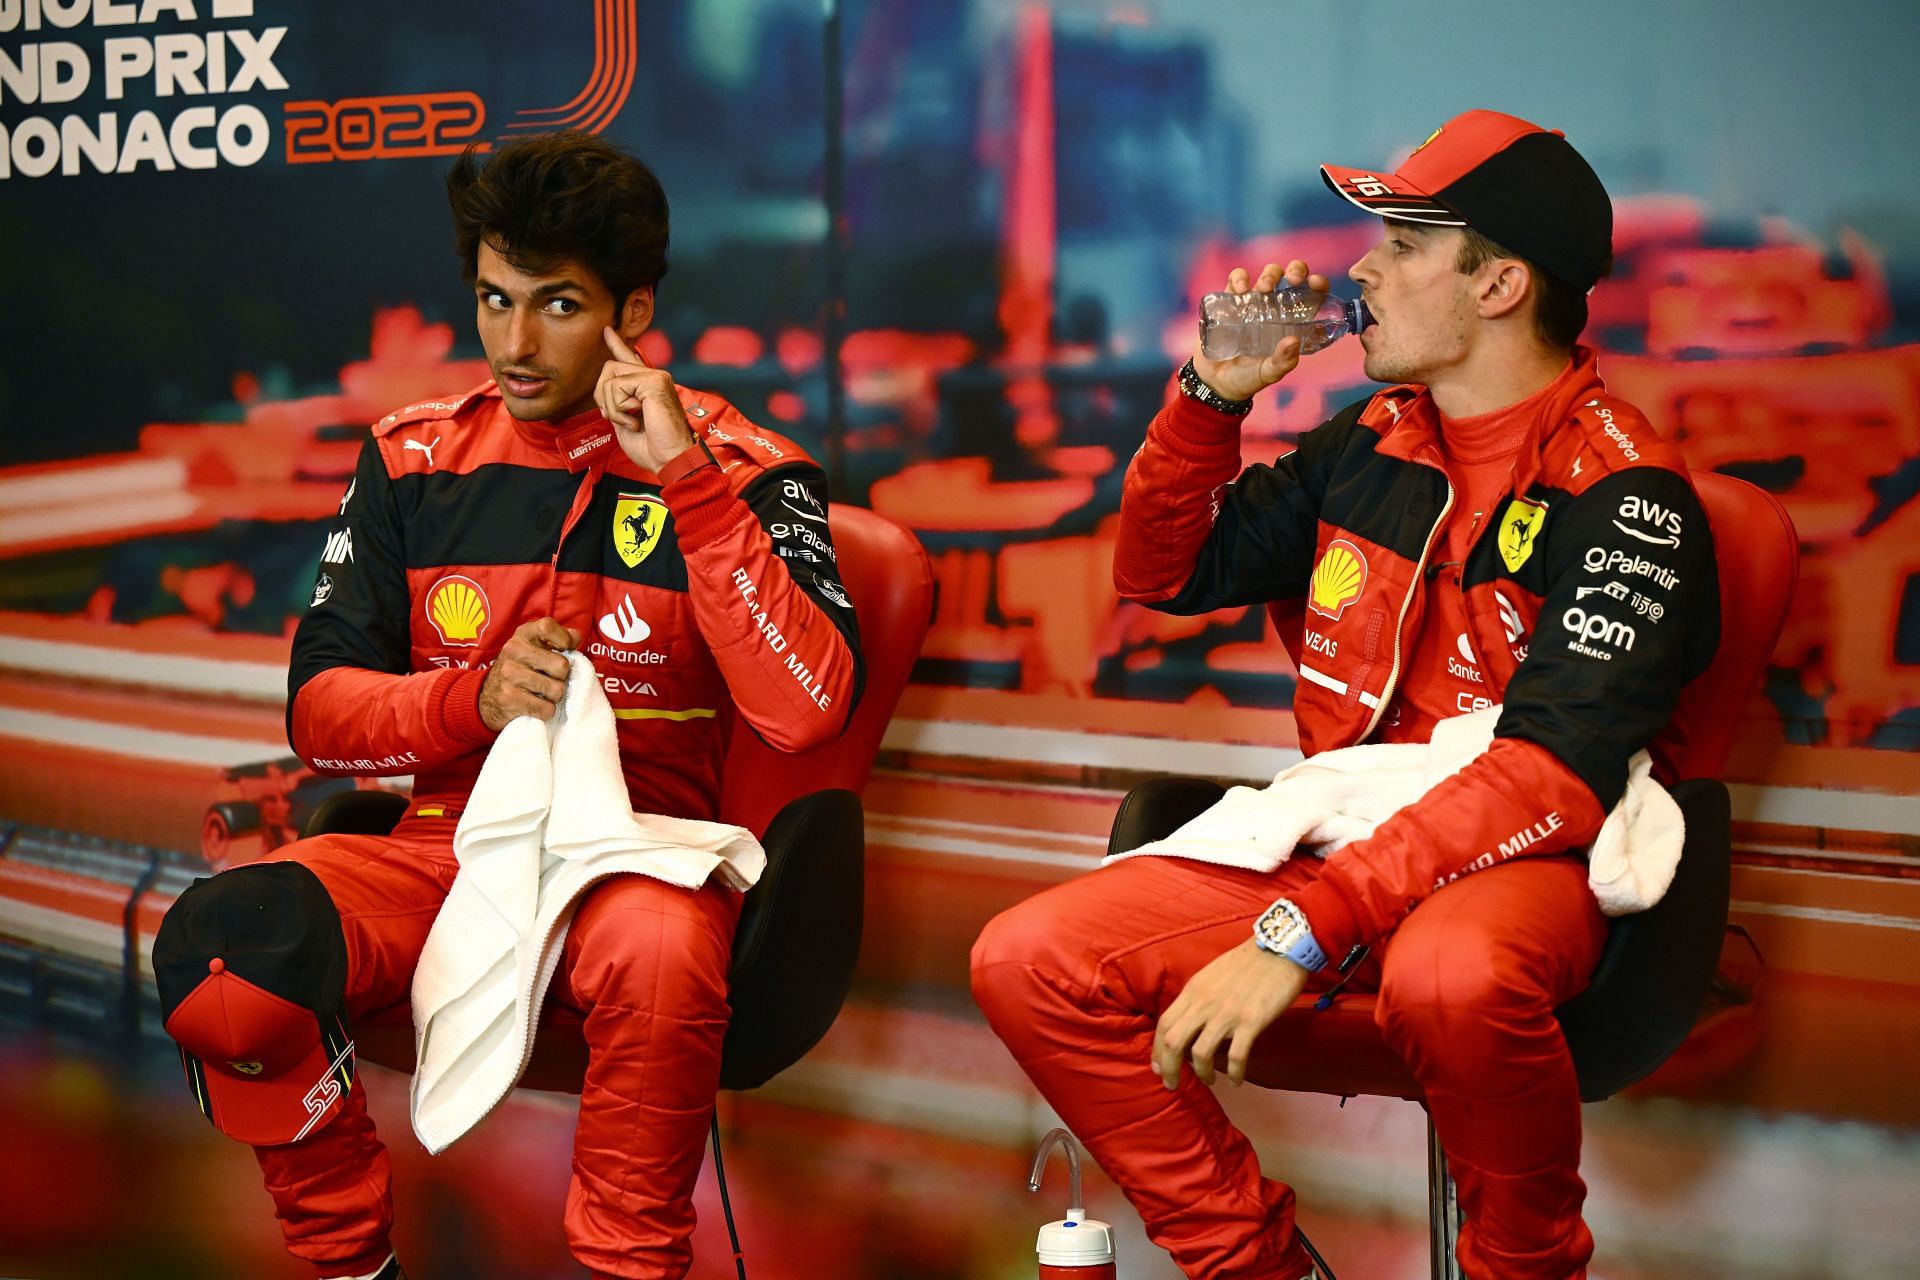 Carlos Sainz (left) and Charles Leclerc (right) during the 2022 F1 Monaco GP weekend. (Photo by Clive Mason/Getty Images)